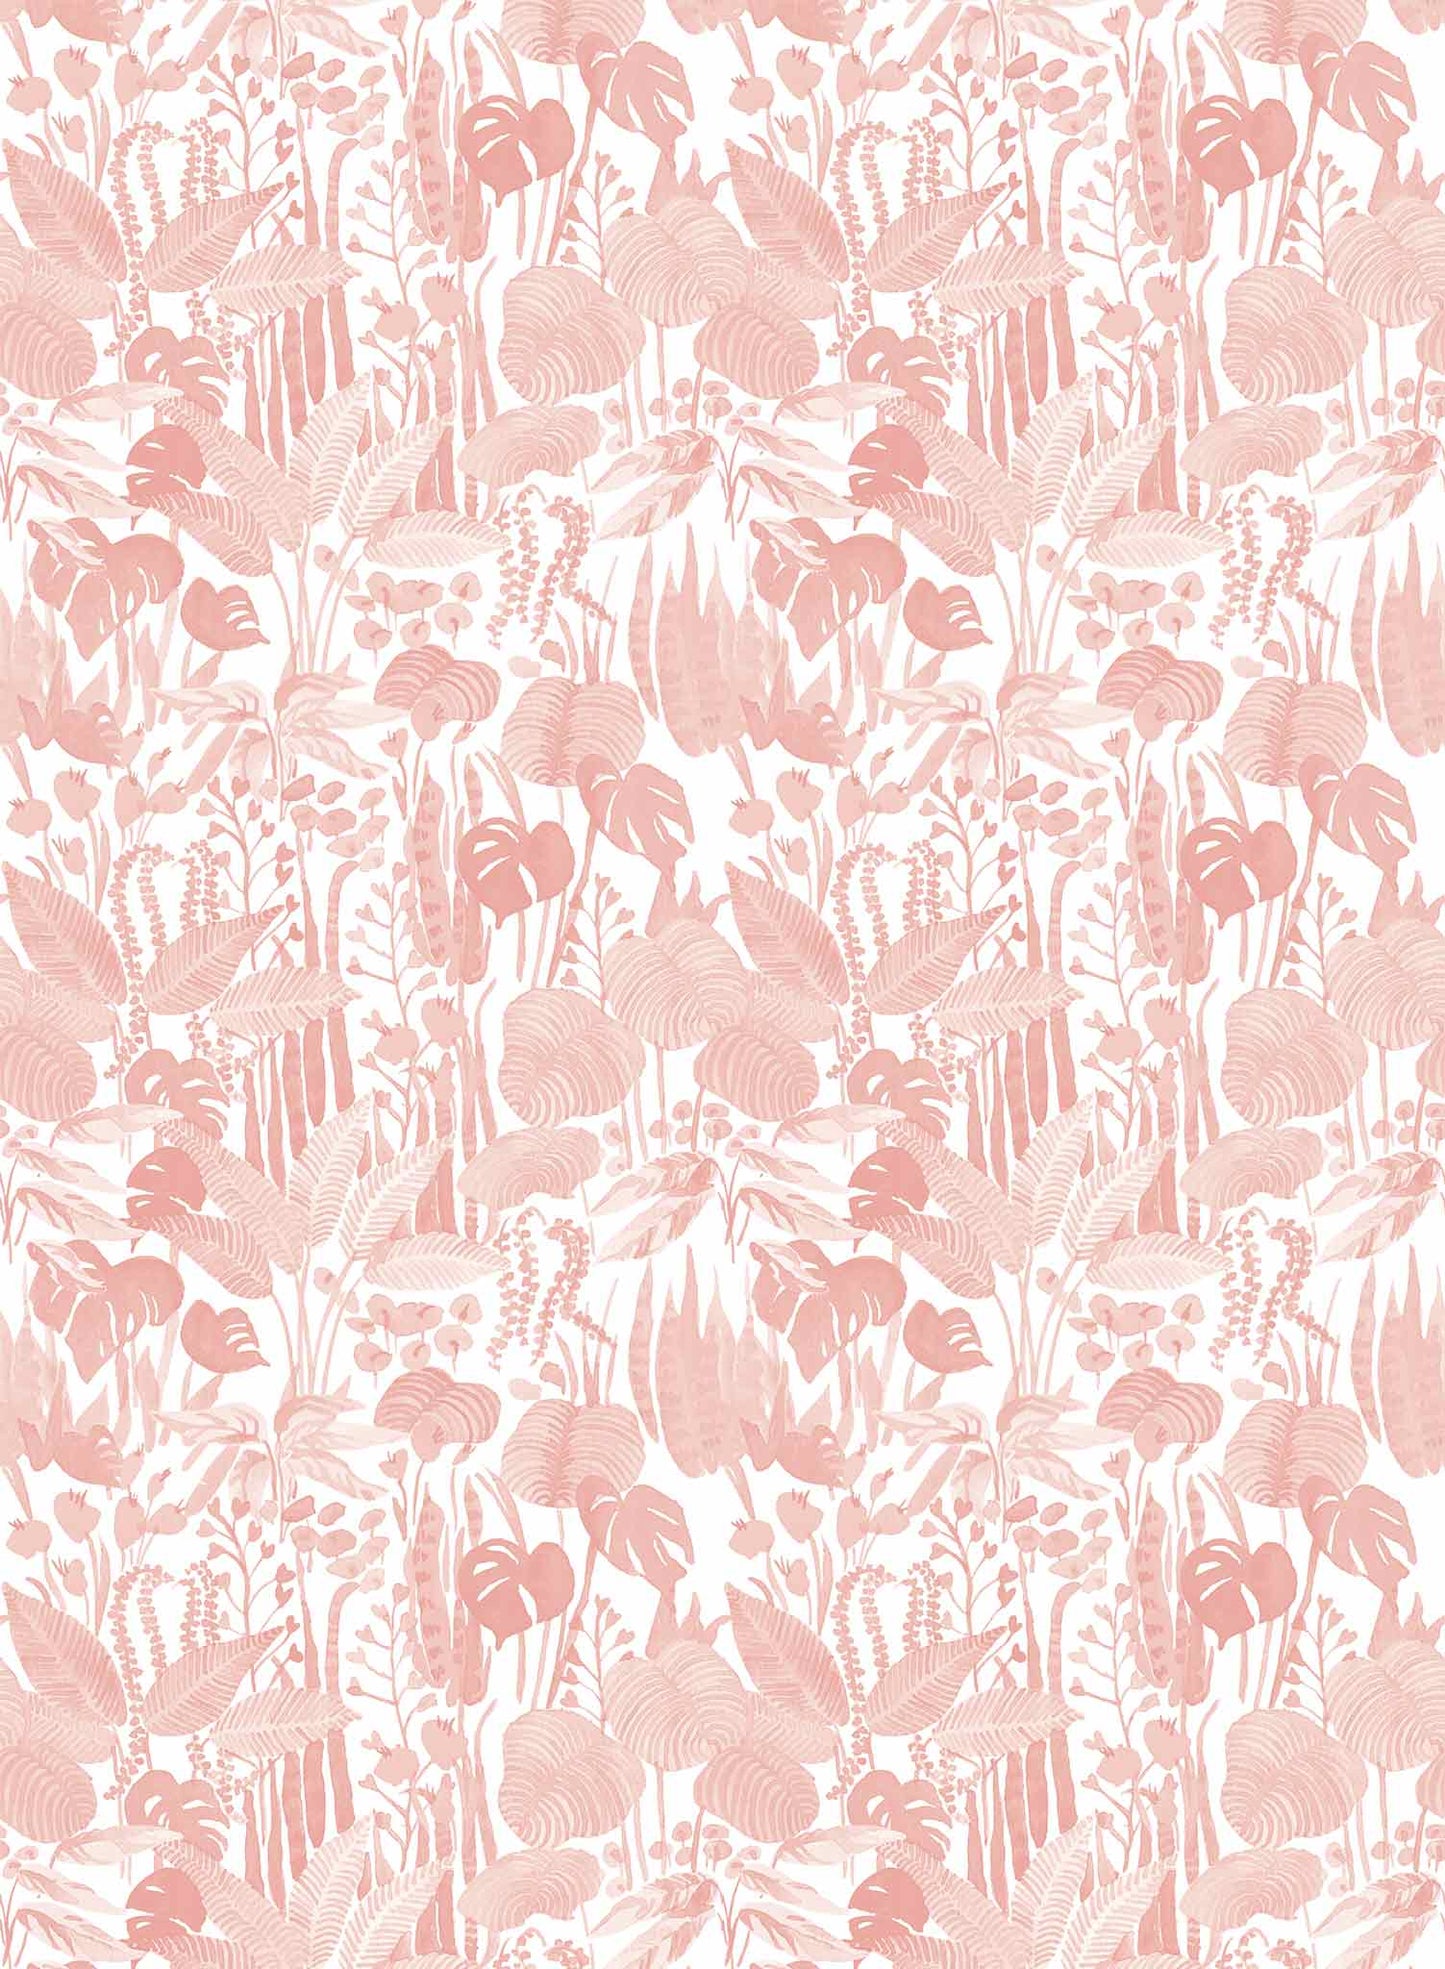 Tropicalia is a minimalist wallpaper by Opposite Wall of a variety of tropical plant leaves.